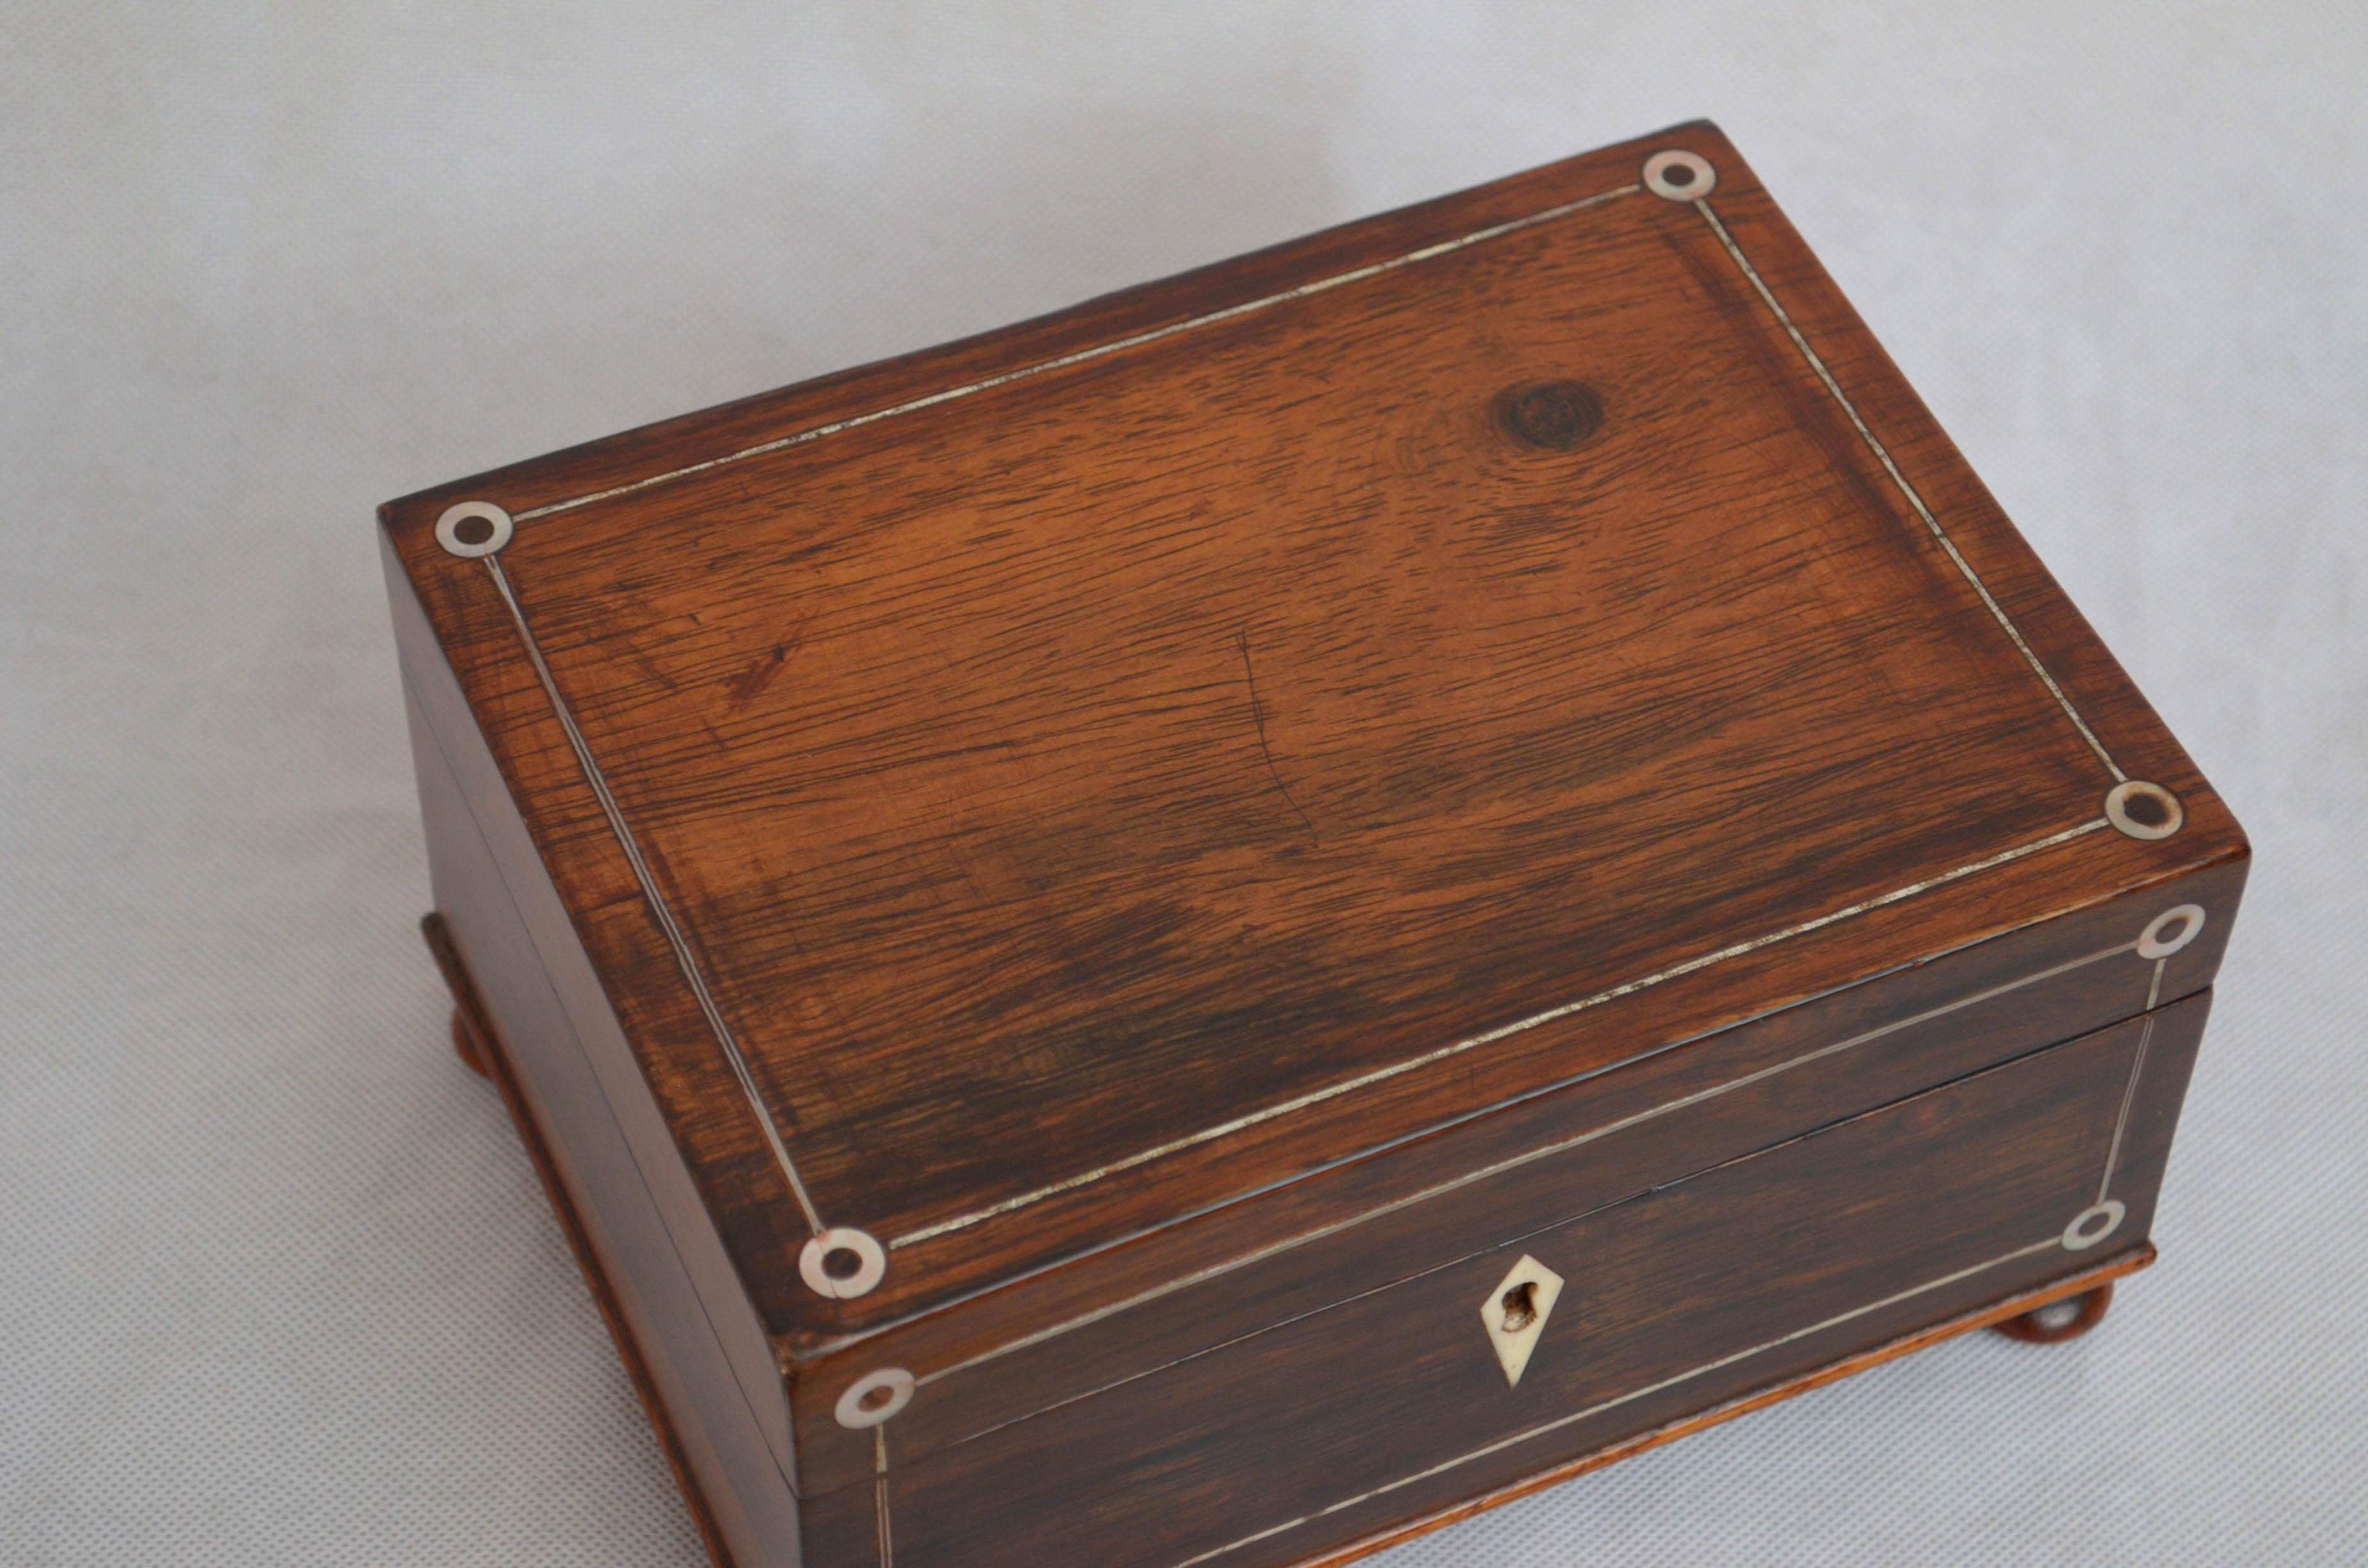 Very attractive rosewood sewing box or jewelry box with decorative metal and mother of pearl inlays and hinged top which opens to reveal clean relined interior with lift up tray, all standing on bun feet. This antique box has been sympathetically